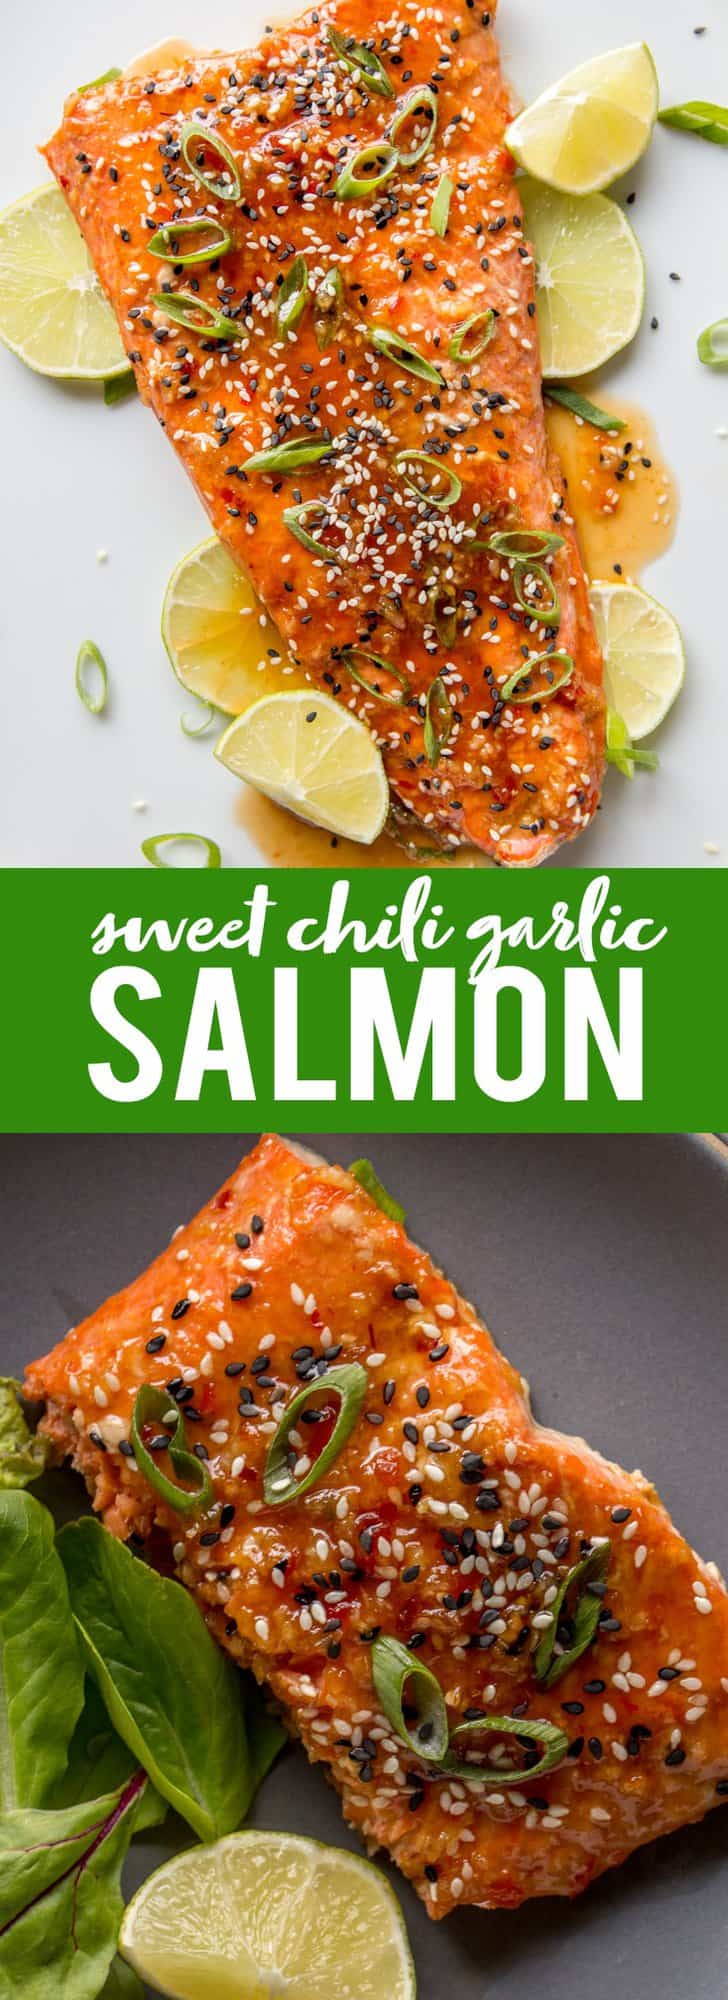 This Baked Sweet Chili Garlic Salmon will be your favorite way to eat salmon! This quick and easy salmon recipe only takes 20 minutes and is packed with sweet, tangy and spicy Asian flavors that will become a family dinner favorite. |Easy dinner recipe | 20 minute dinner | Quick Dinner Recipe | Salmon Recipe | Fish Recipe | Asian Salmon 